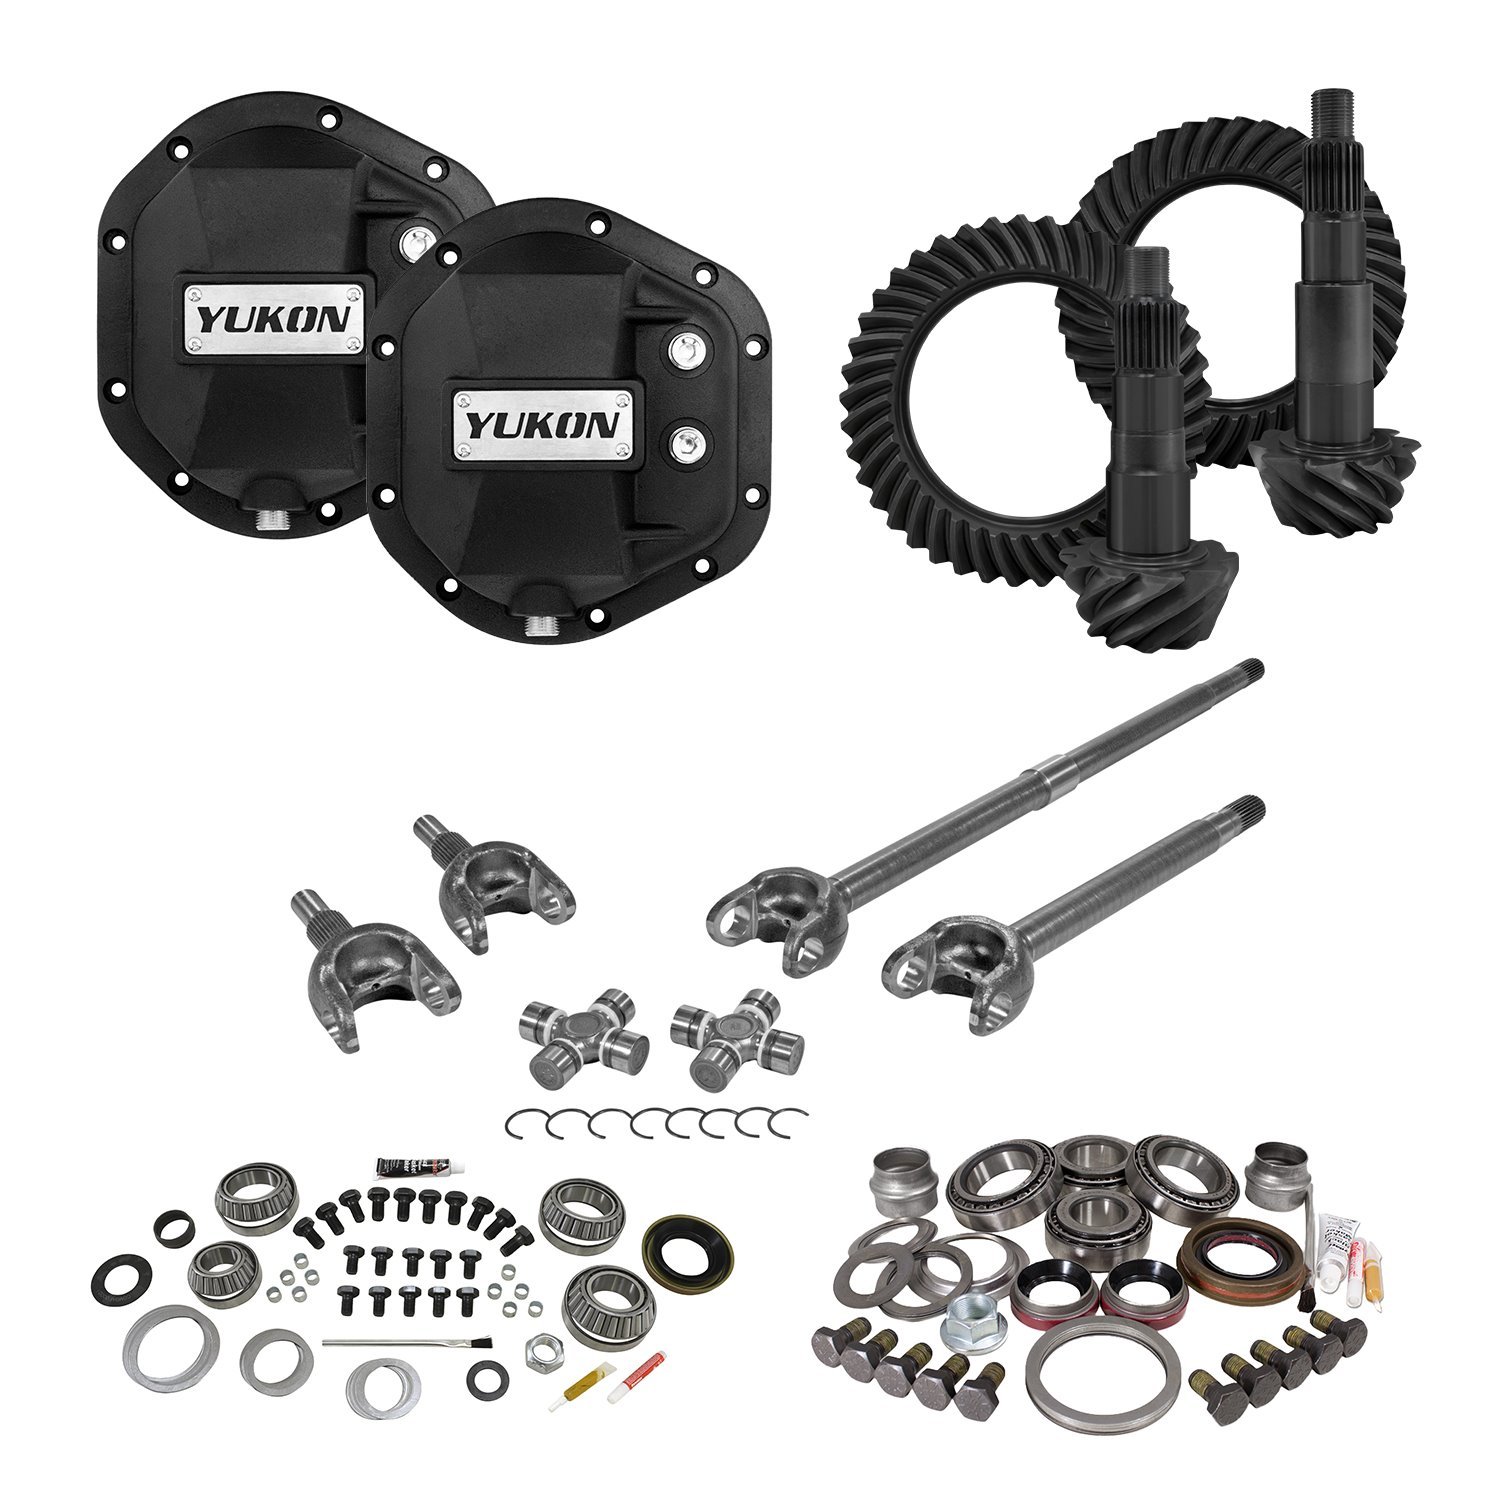 Stage 3 Jeep Jk Re-Gear Kit W/Covers, Front